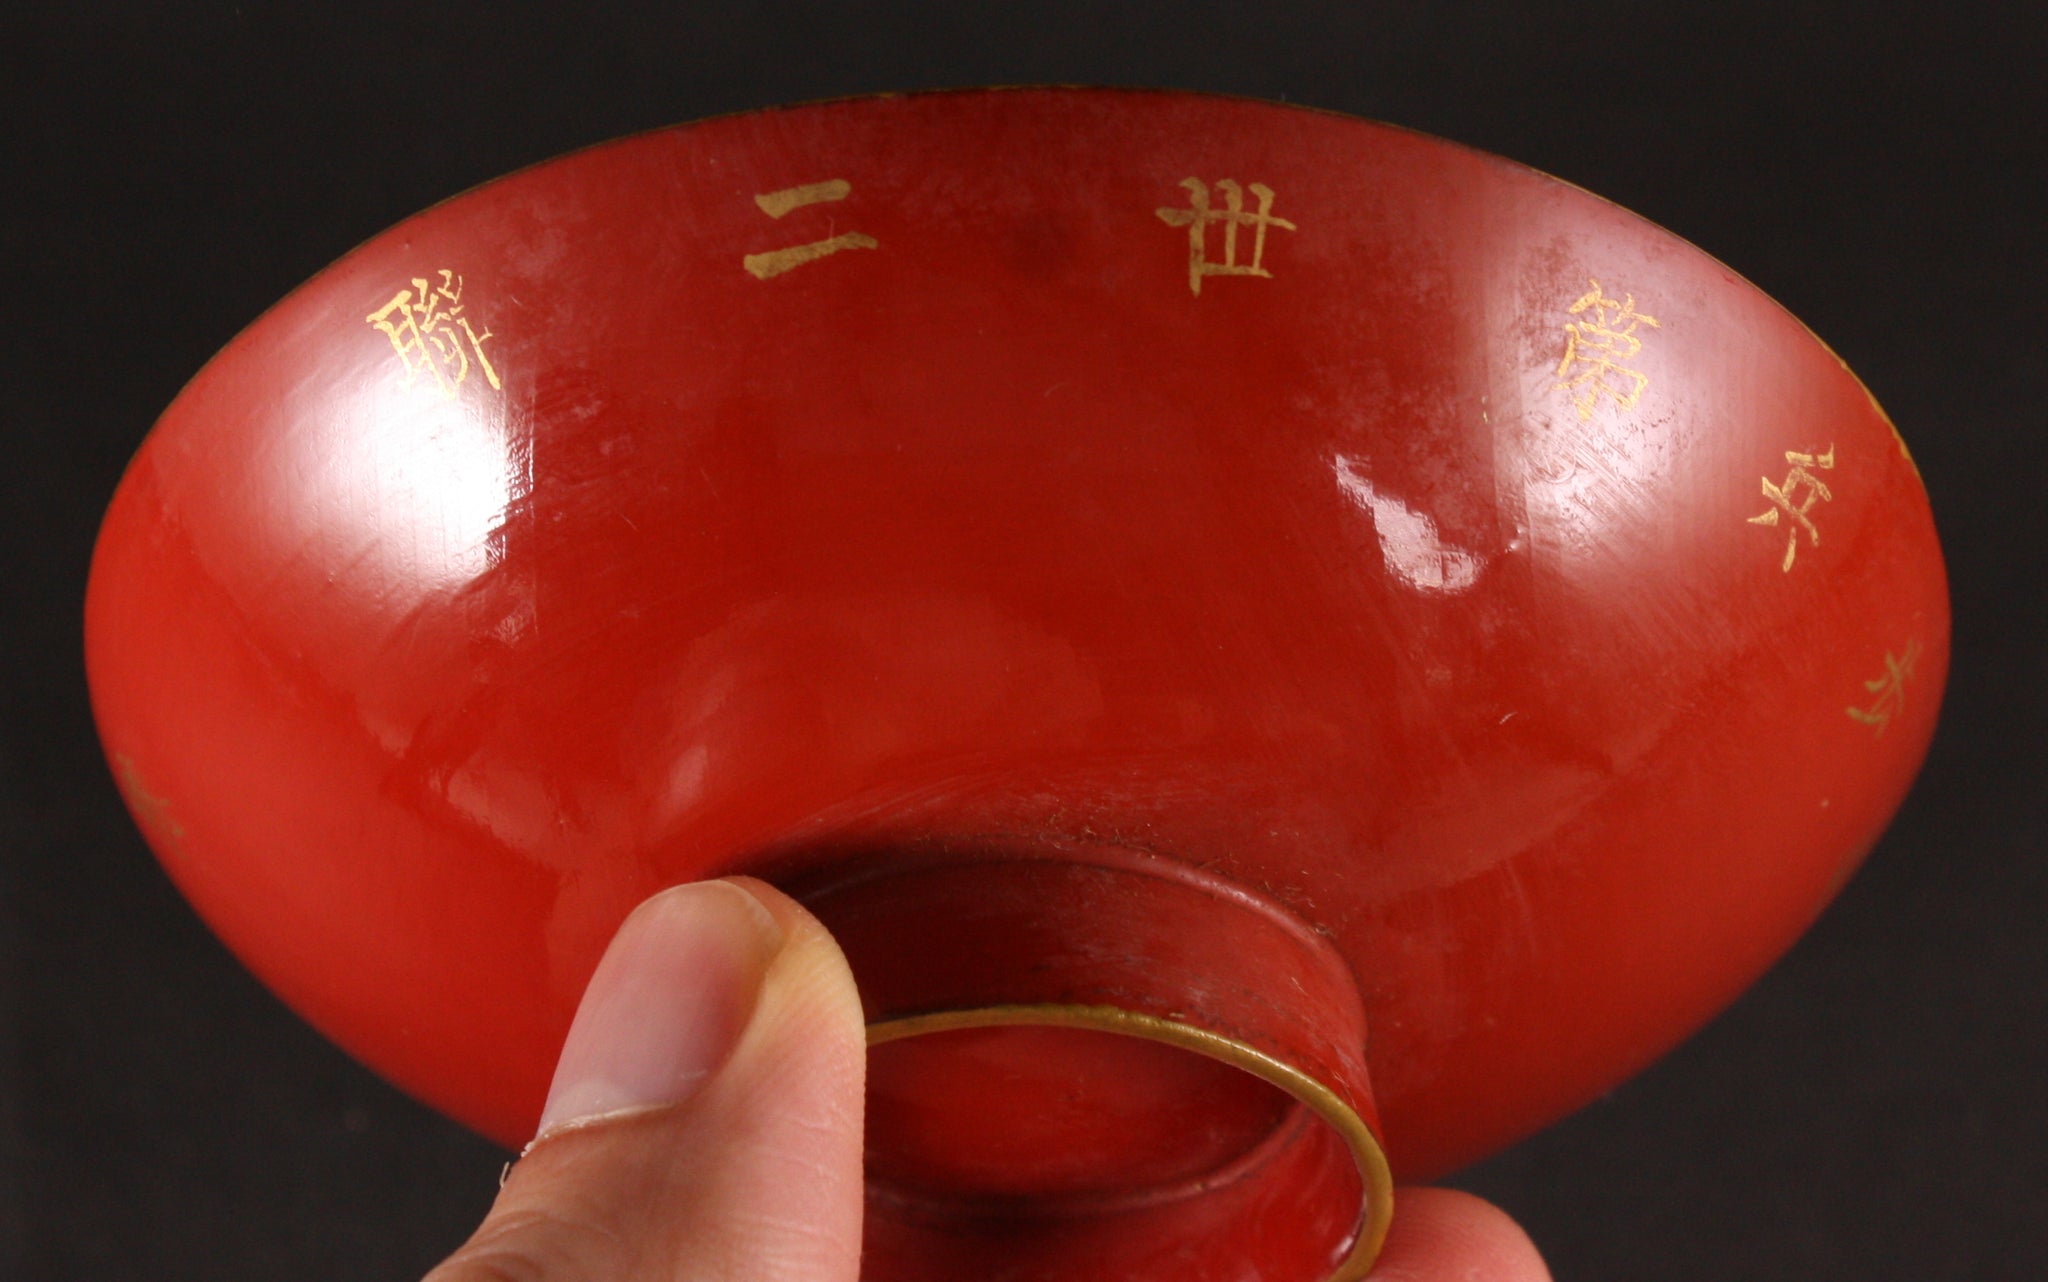 Very Rare Russo Japanese War Northeast China Map Lacquer Army Sake Cup